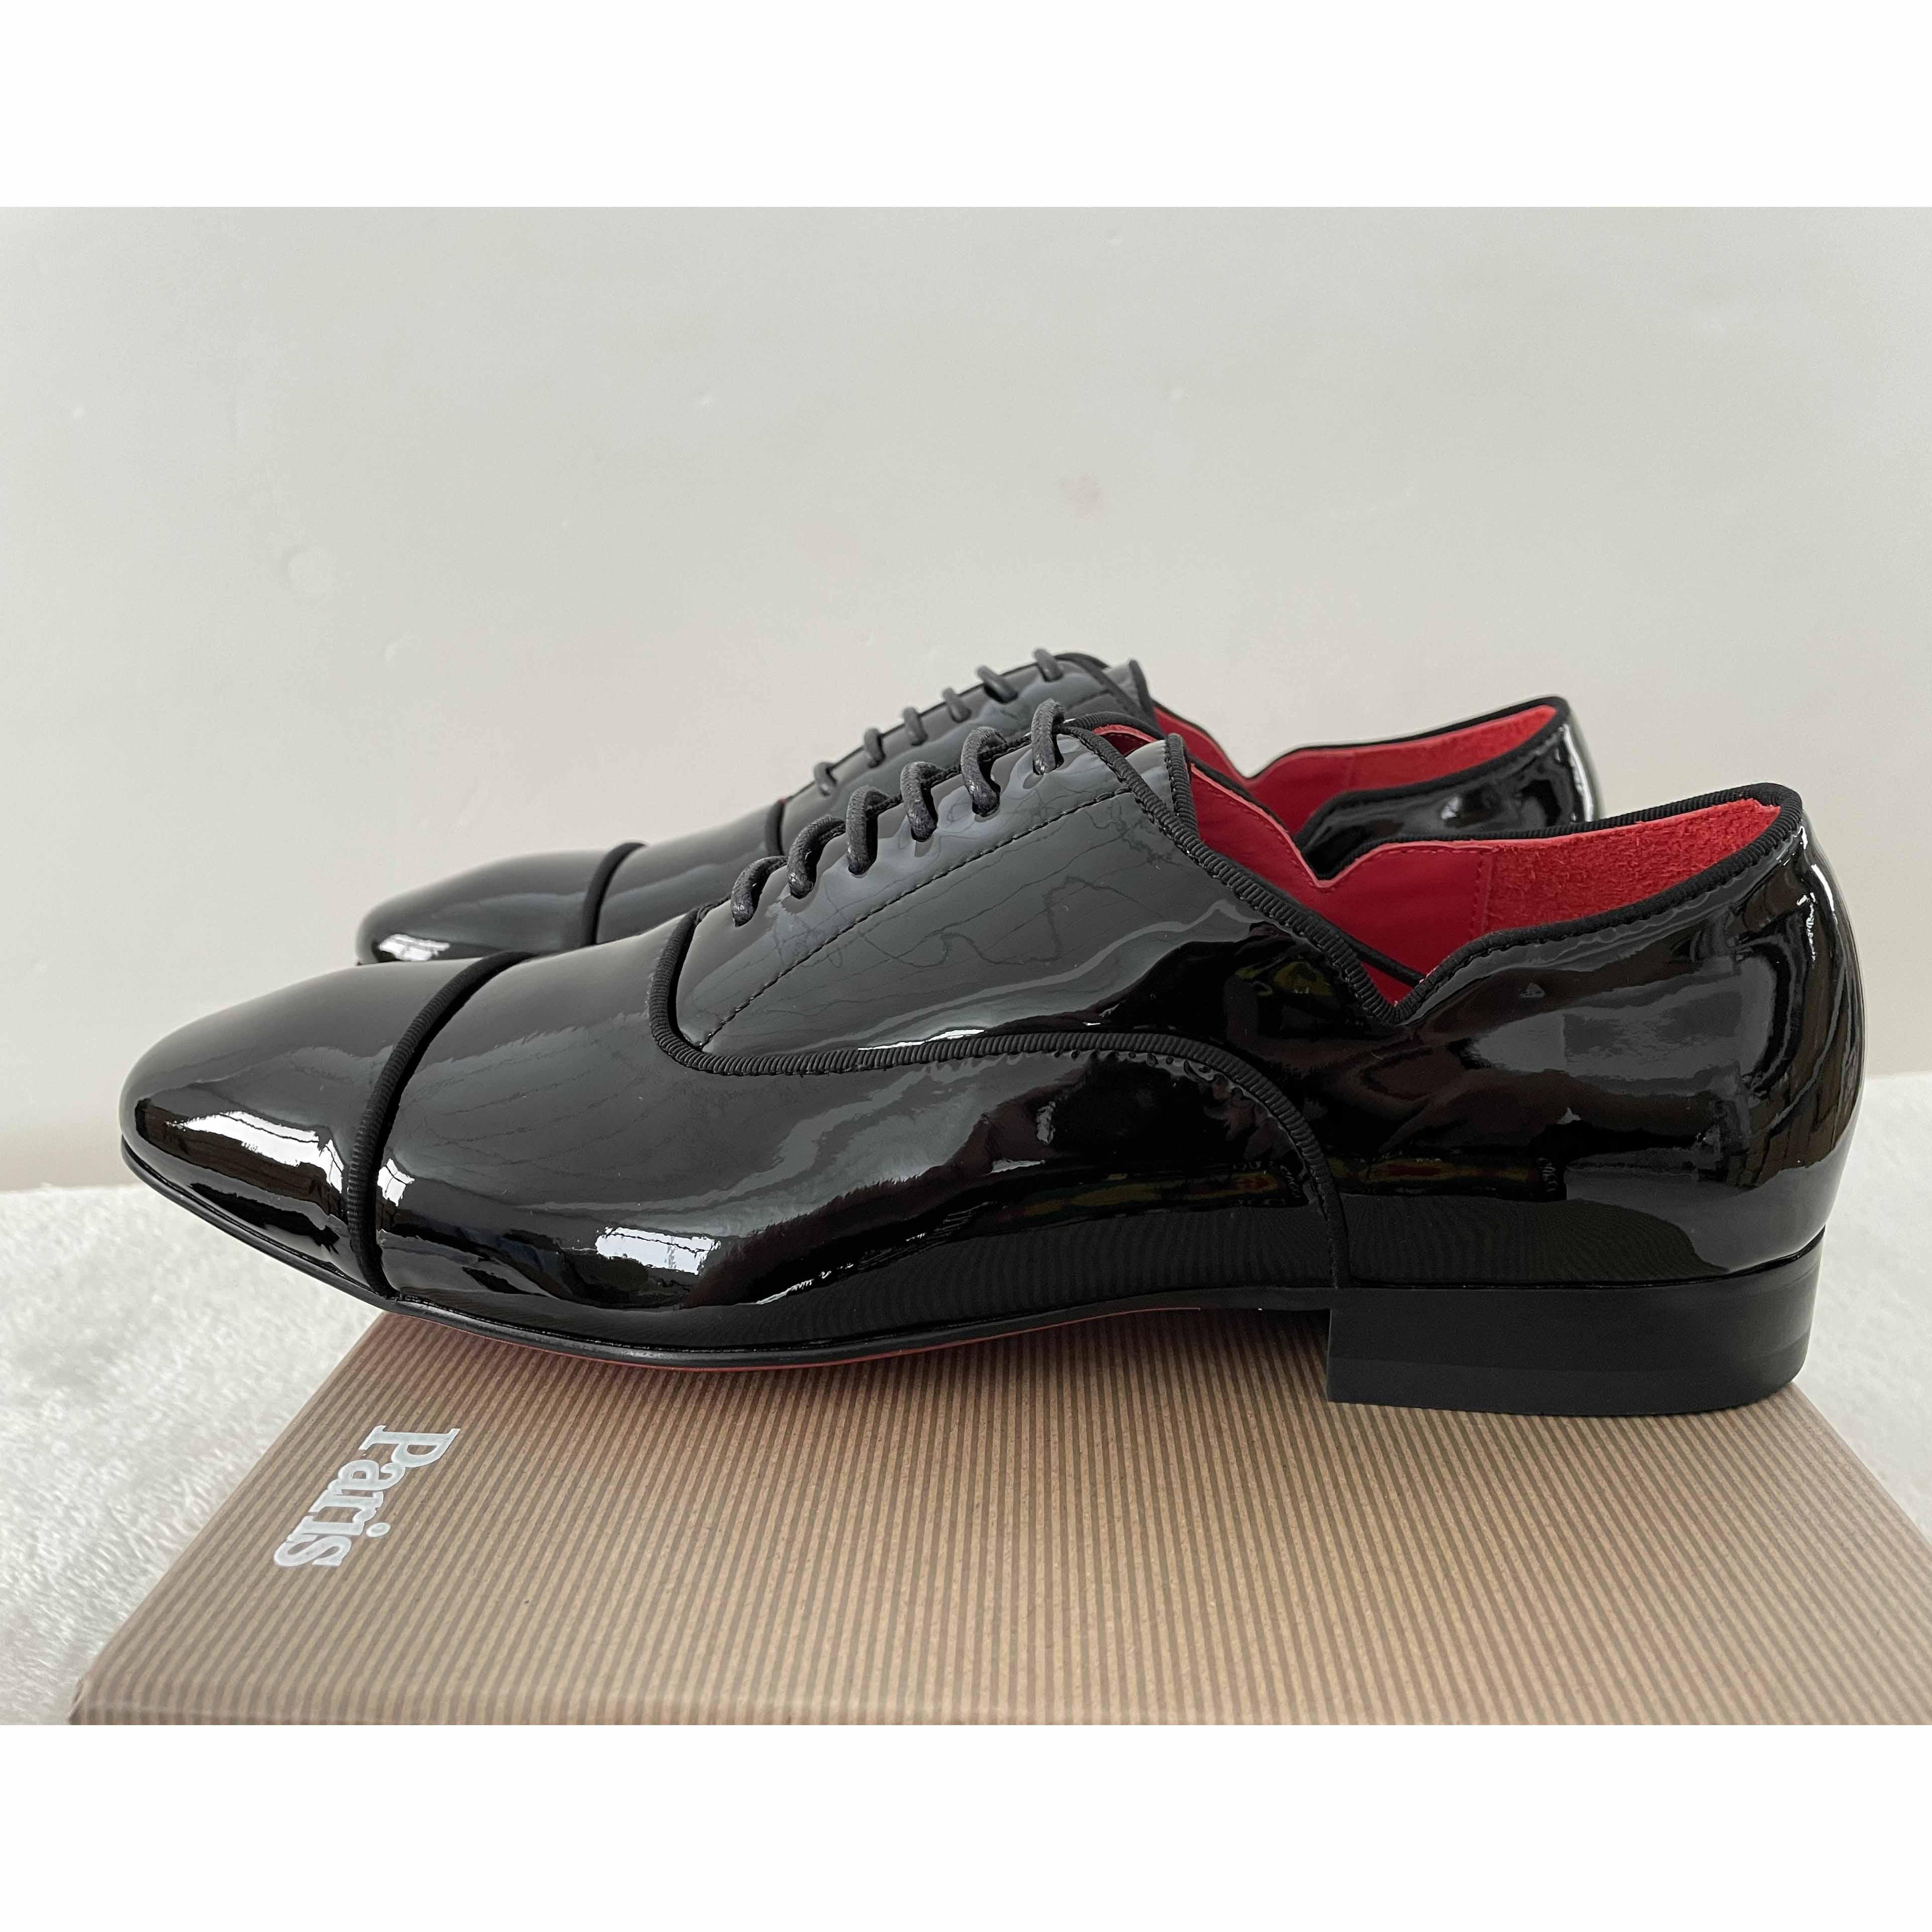 Christian Louboutin Greggy Chick Patent Leather Oxford Shoes - DesignerGu